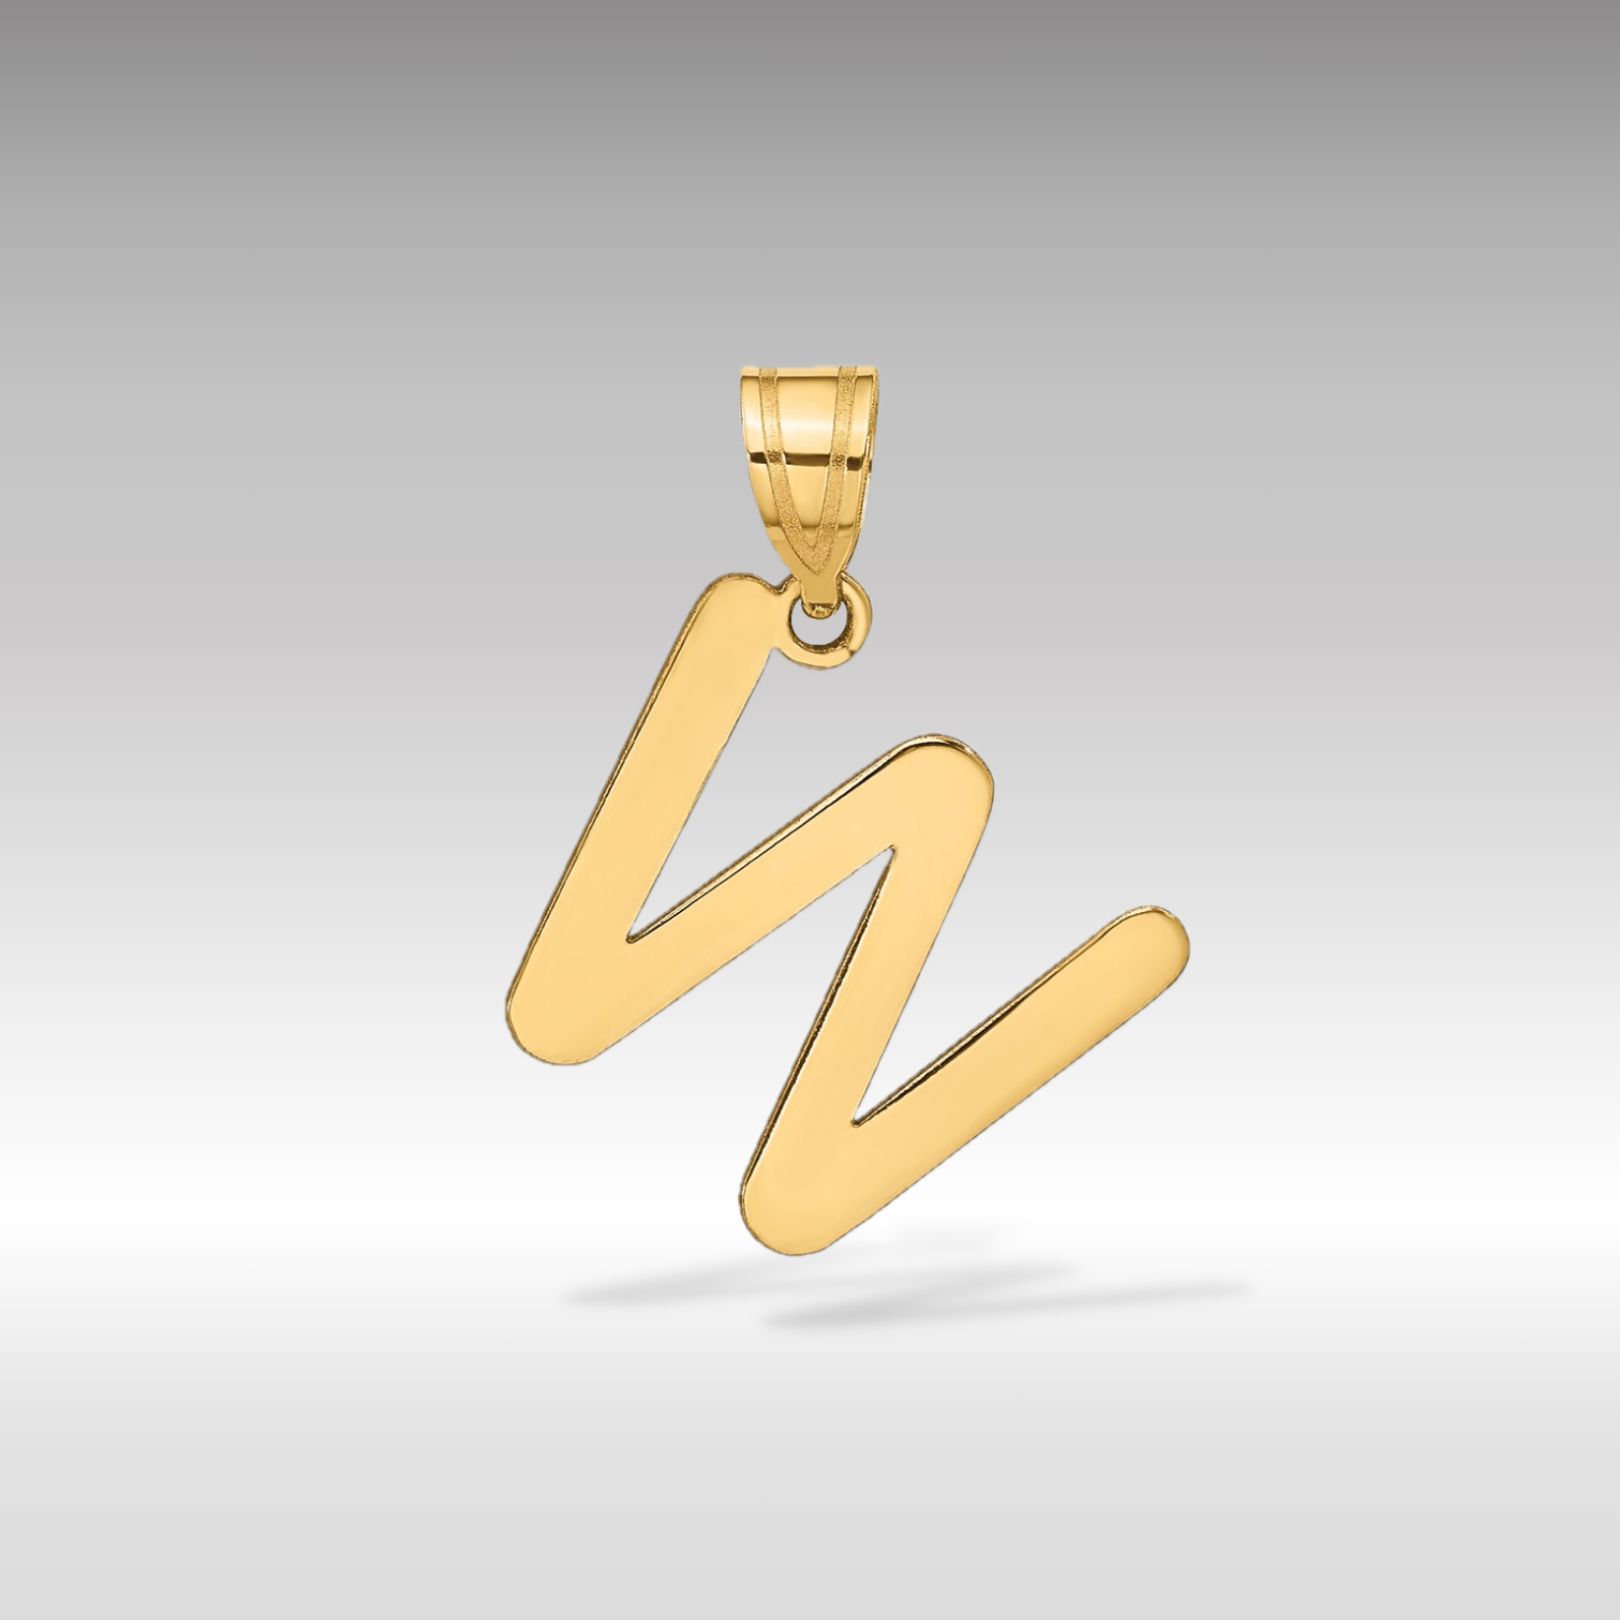 14k Gold Polished Letter 'W' Initial Charm - Charlie & Co. Jewelry